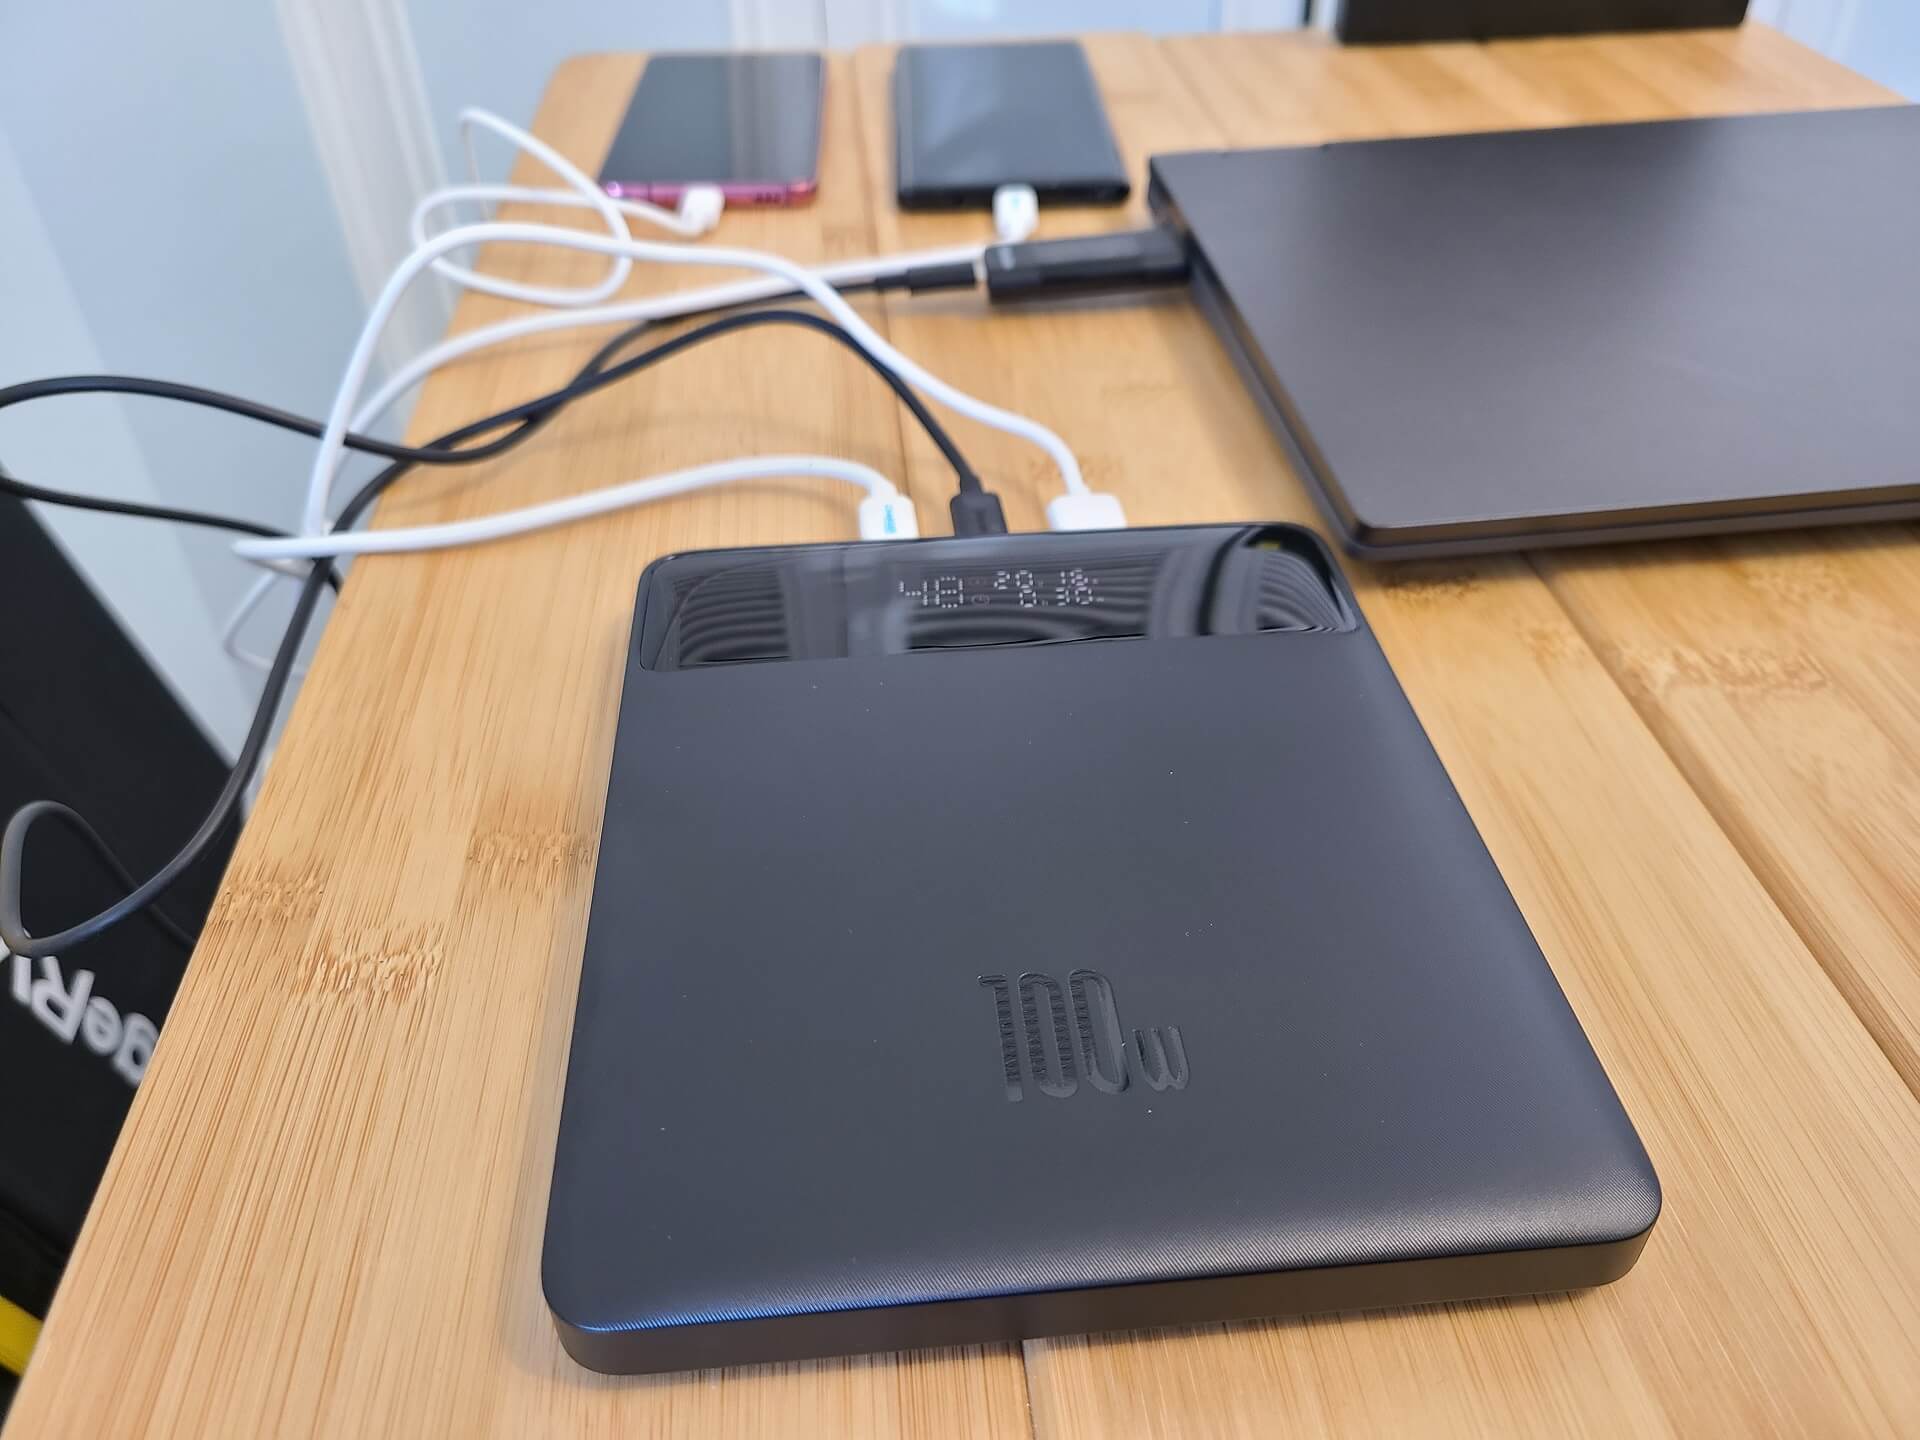 Baseus Launches Blade Series 100W 20000mAh Power Bank for Laptops